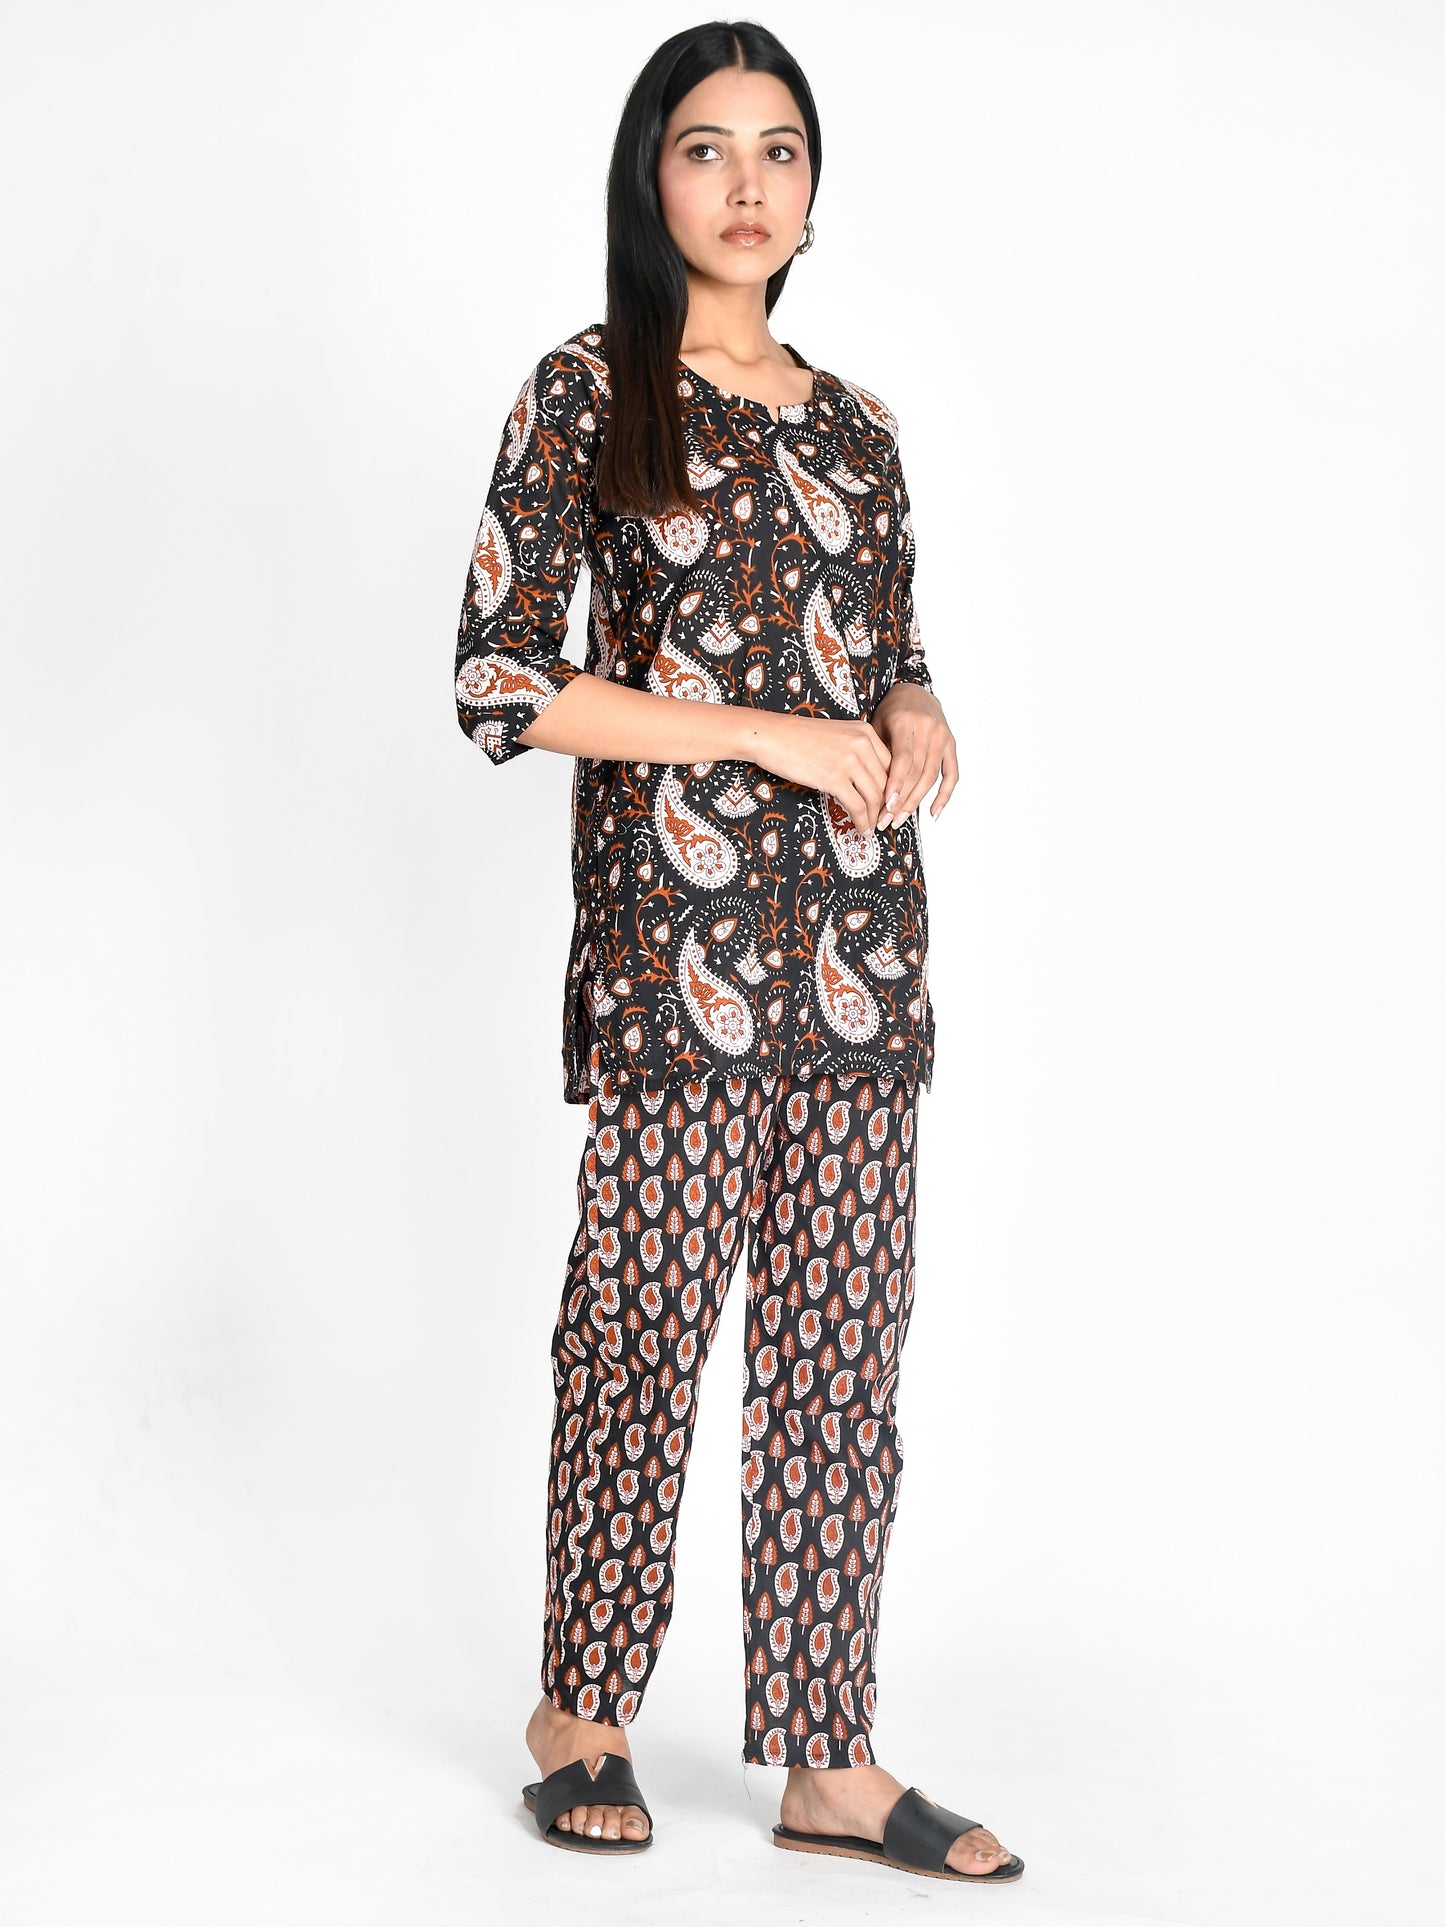 Made from pure cotton, this printed night suit is perfect for women and girls. With its stylish floral design, it's not just comfortable but also fashionable. Get a good night's sleep in this soft and breathable night suit.